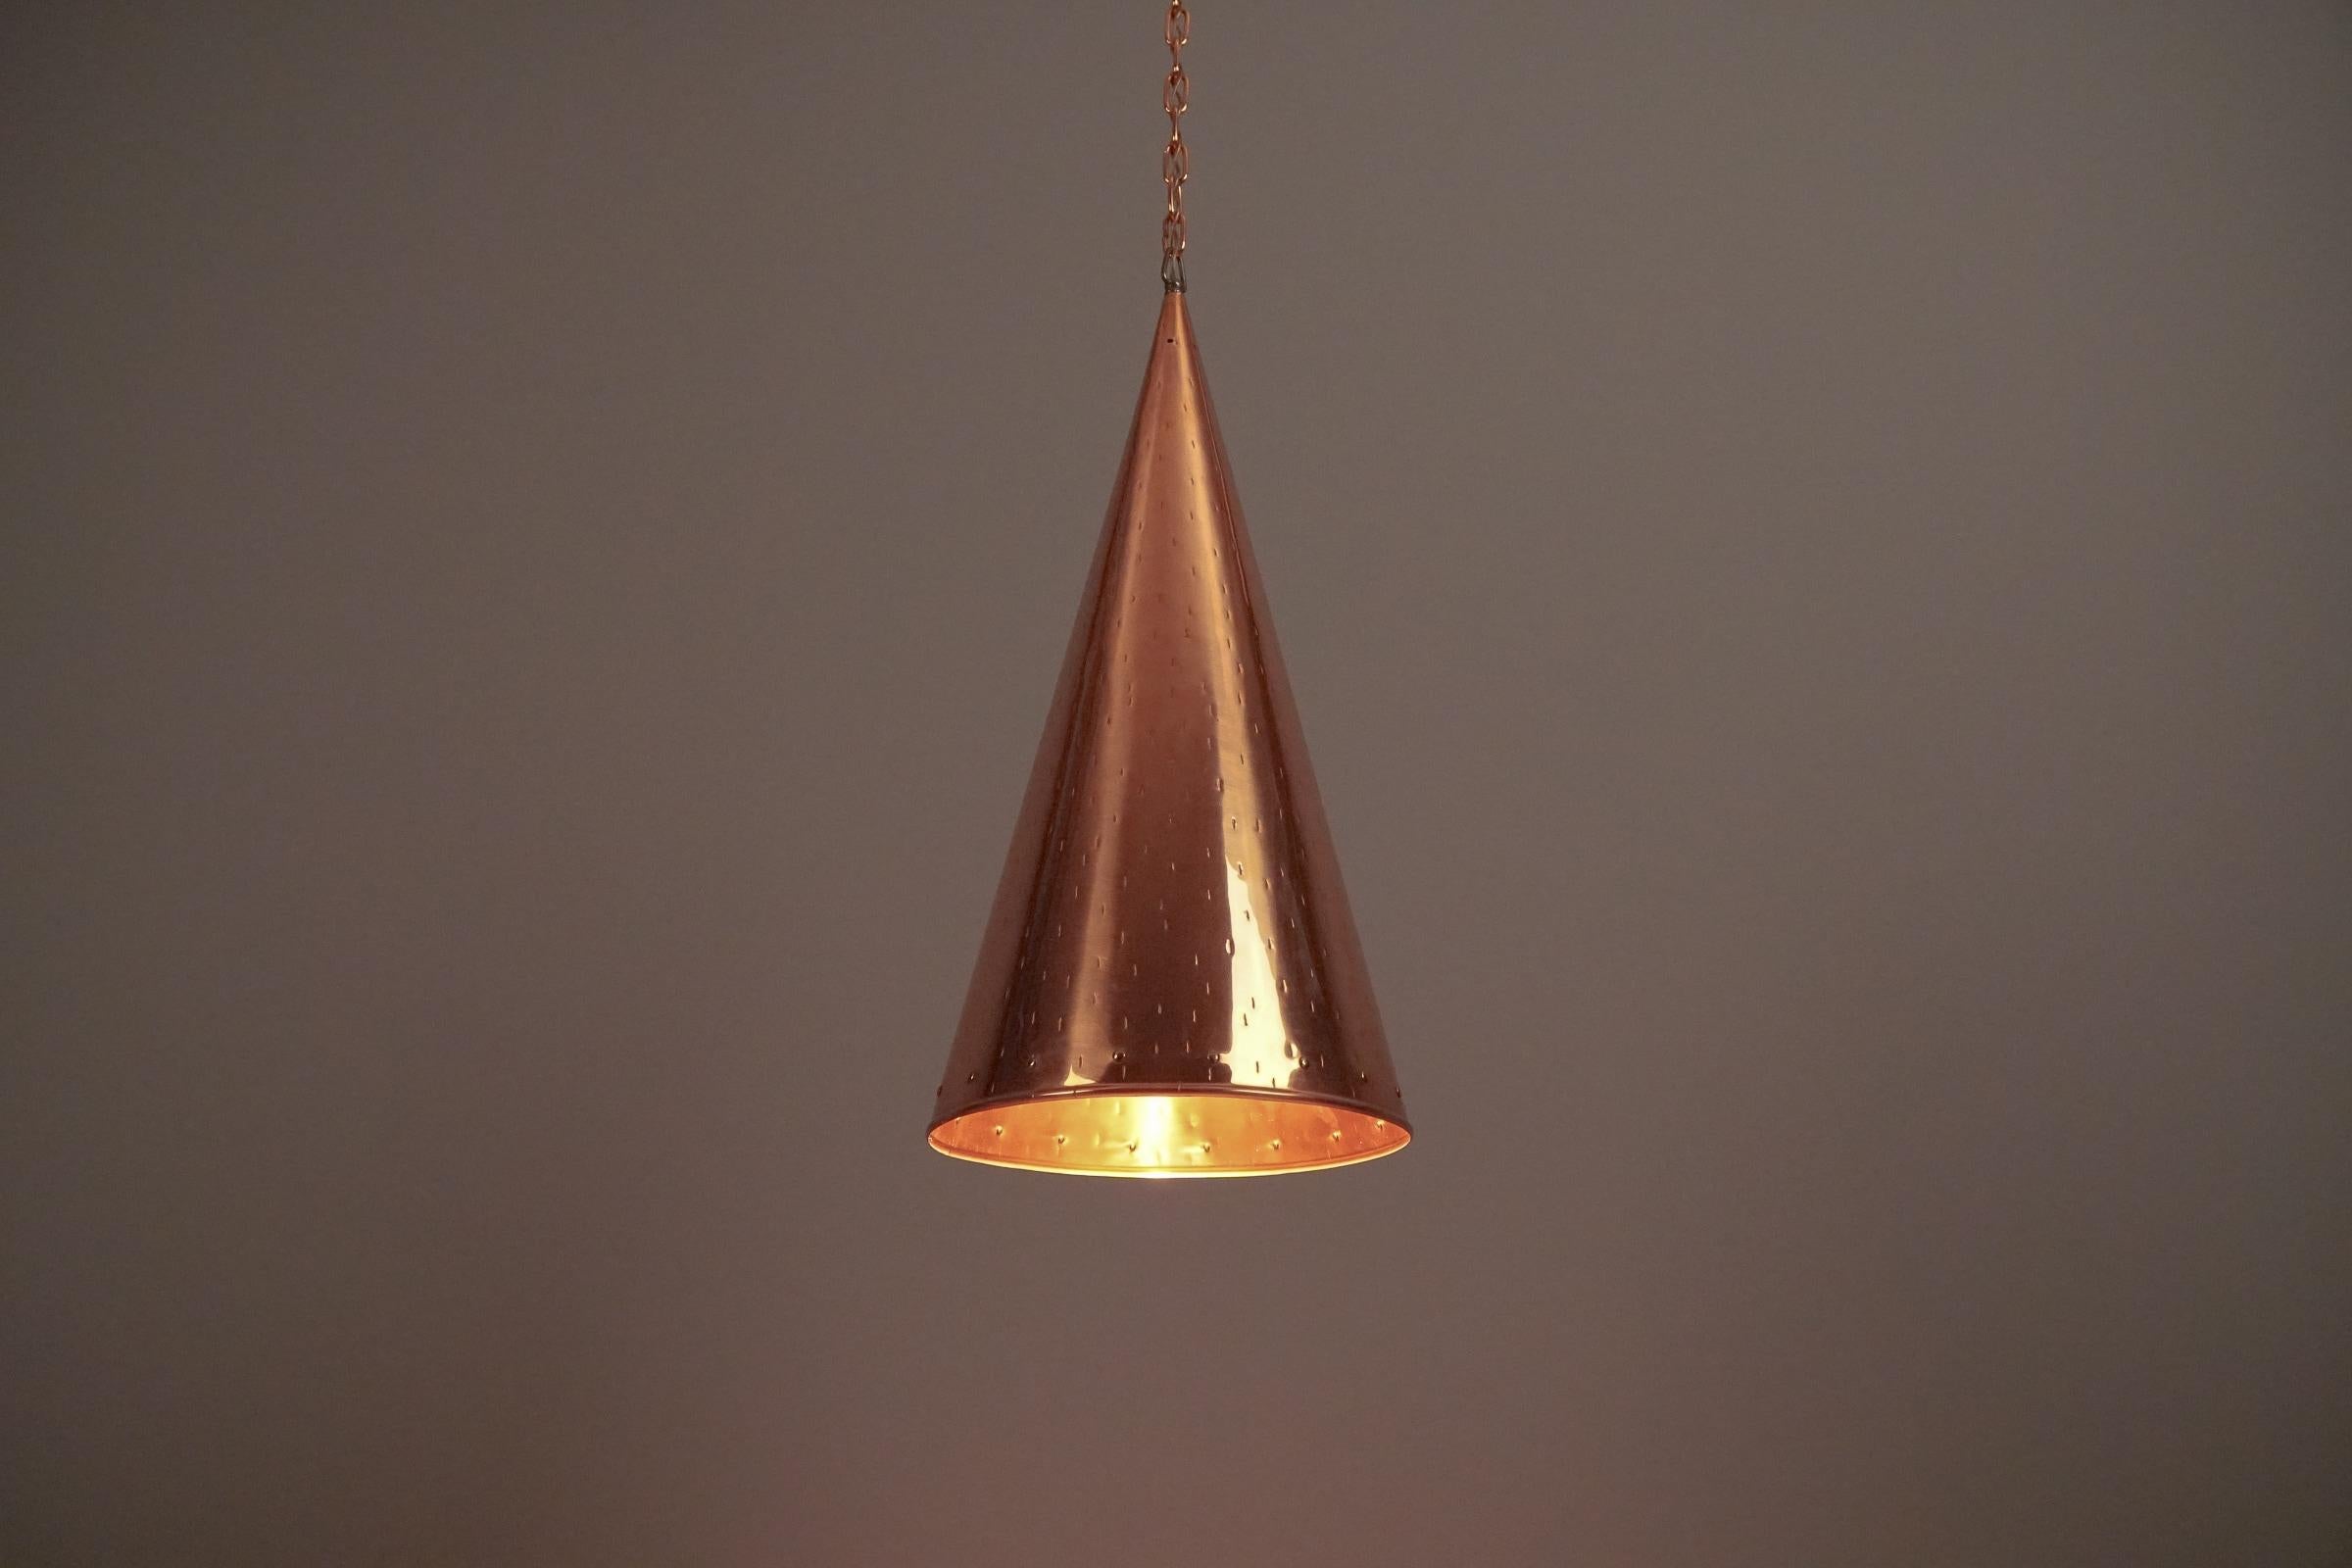 Mid-Century Modern Hammered Copper Cone Pendant Lamps by E.S Horn Aalestrup, 1950s Denmark For Sale